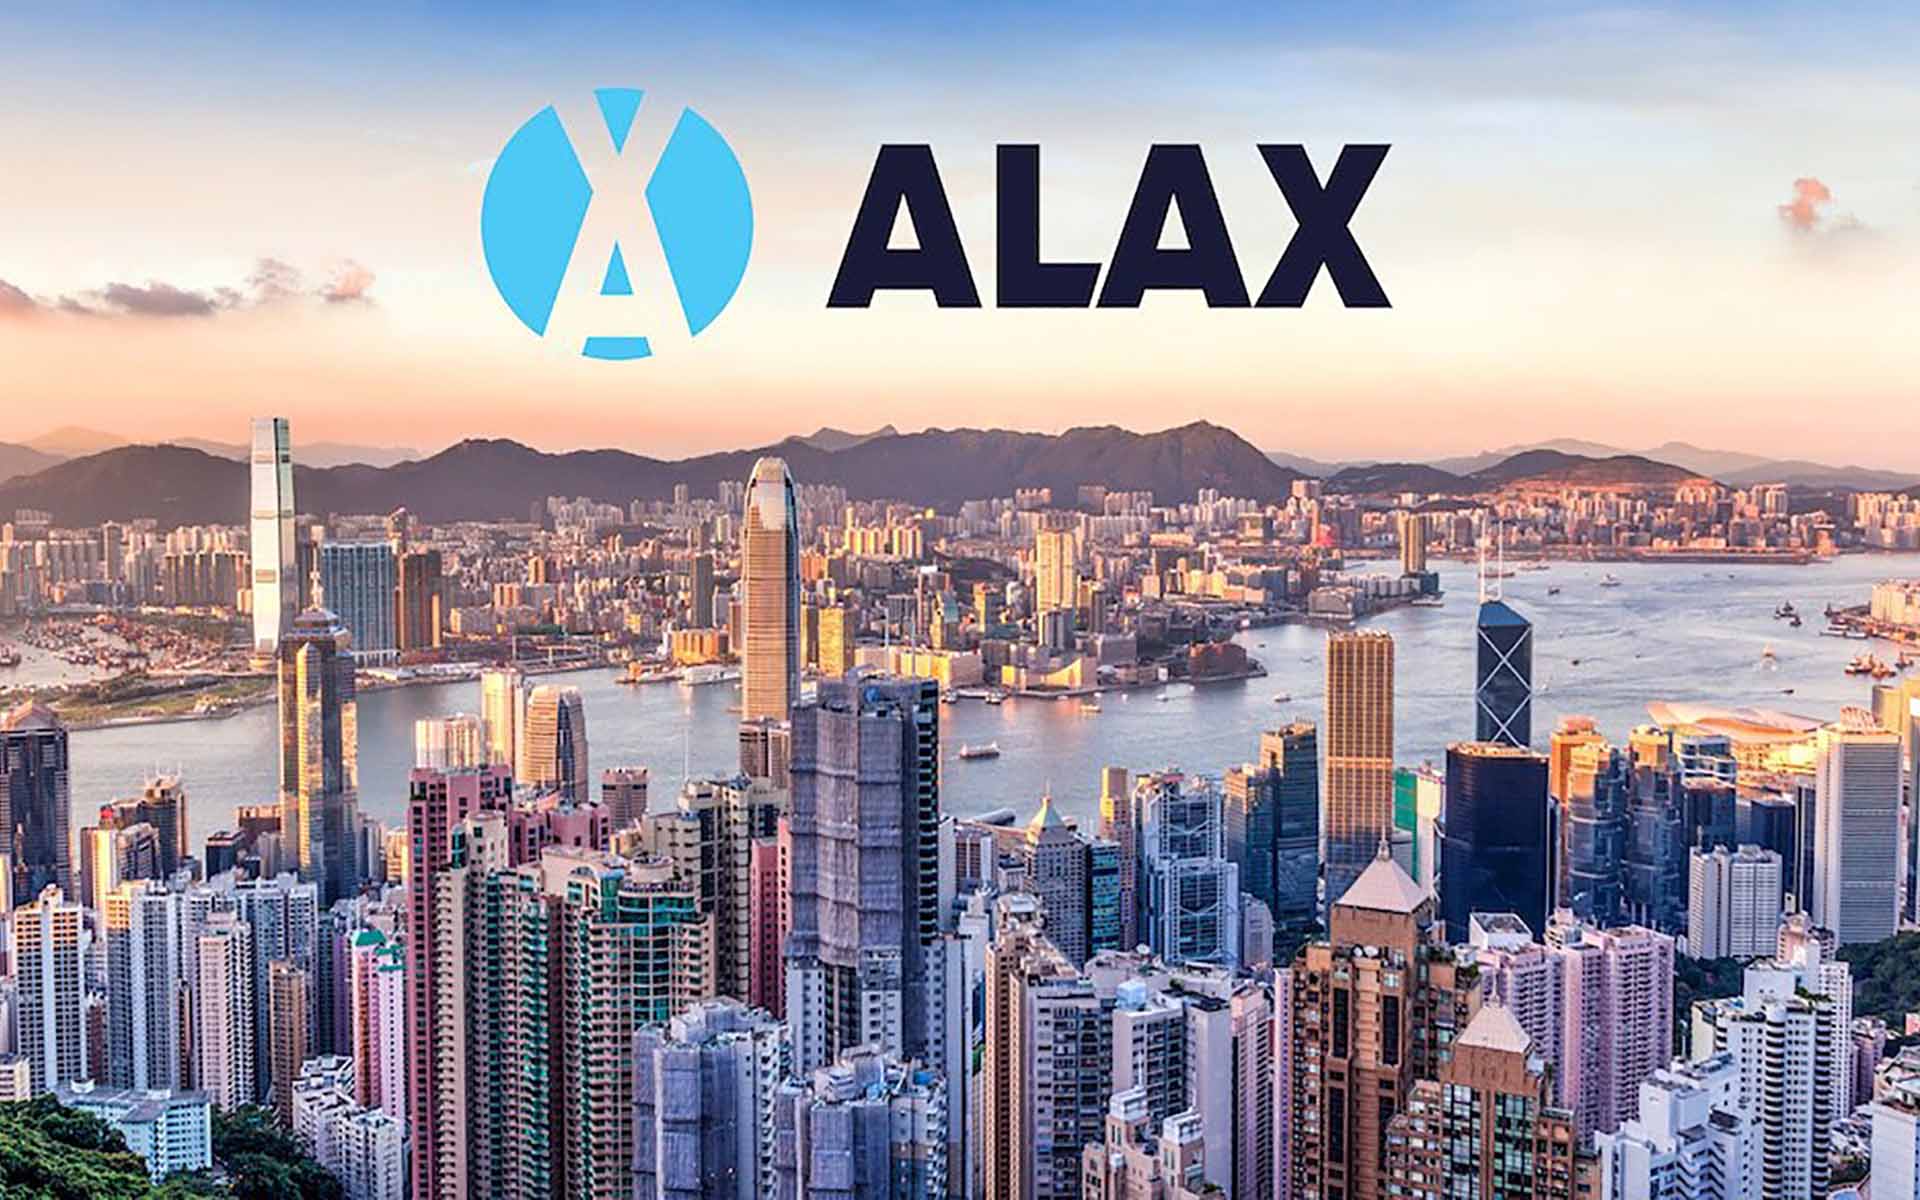 ALAX, the Blockchain-Based App Platform Allowing Access to Unbanked Consumers, Begins Token Generation Event